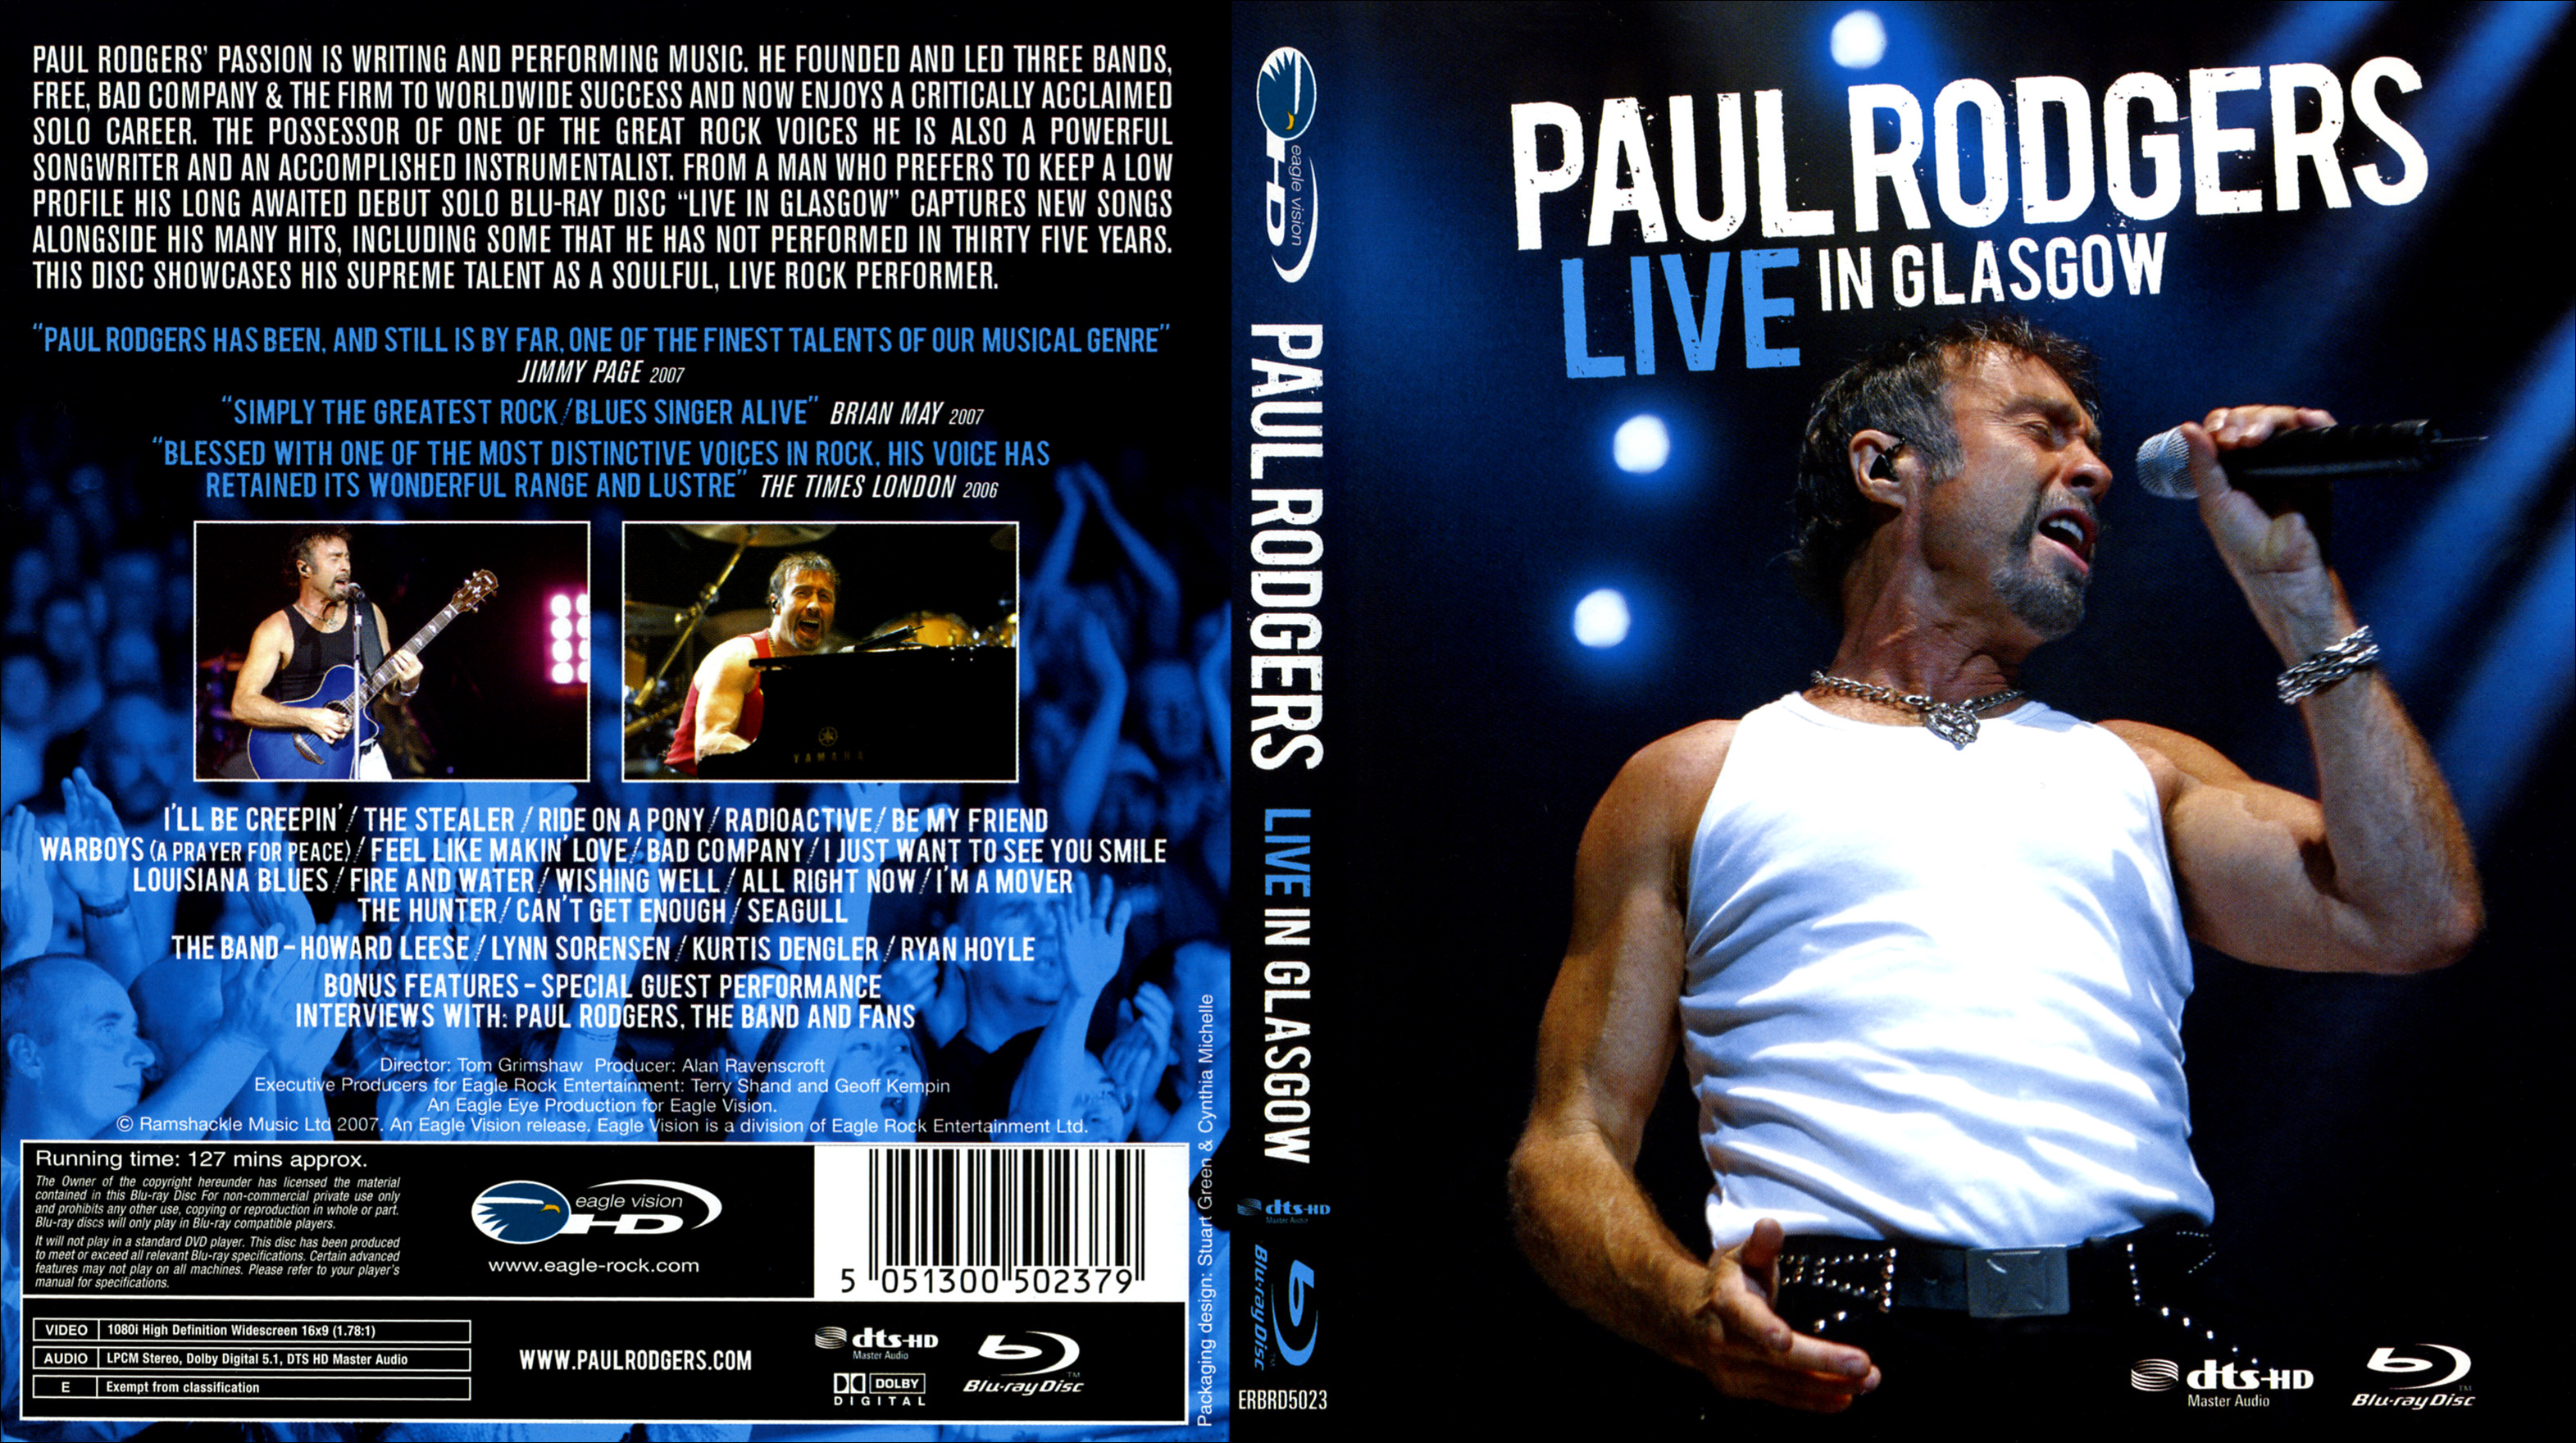 Jaquette DVD Paul Rodgers - Live in Glasgow (BLU-RAY)